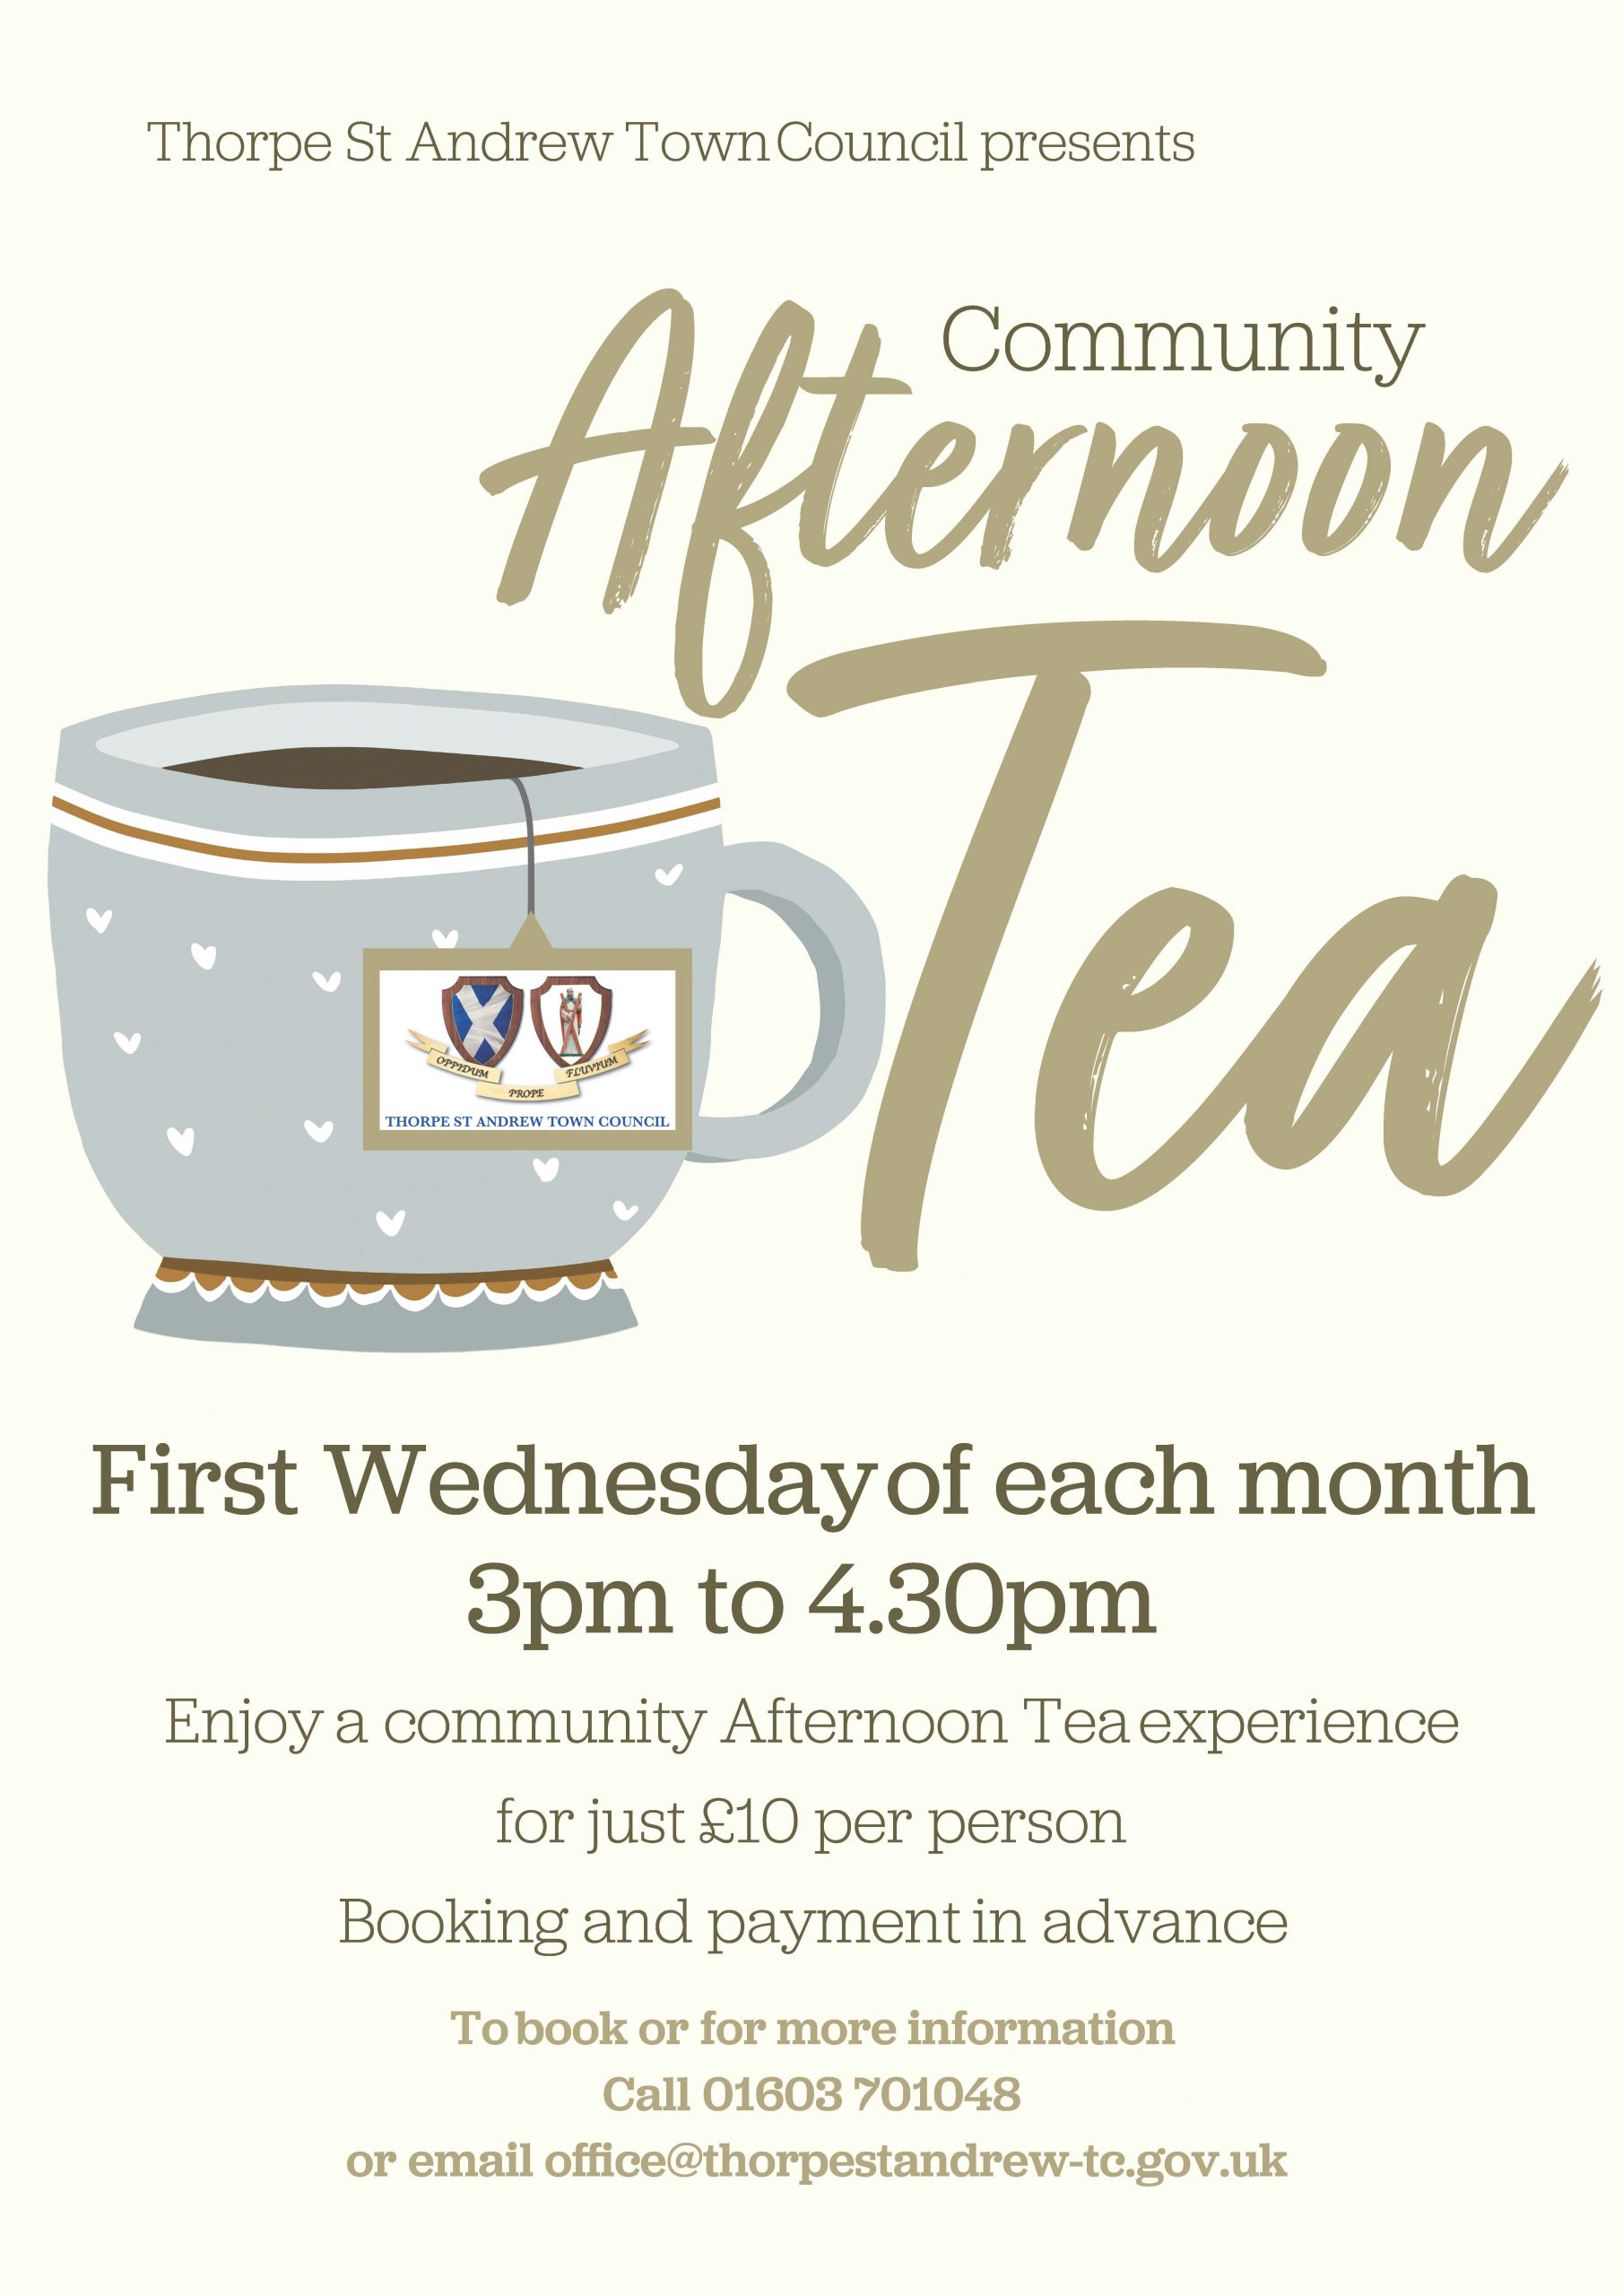 Afternoon Tea First Wednesday of the month 3pm to 4.30pm. Booking essential, price £10 each, contact 01603 701048